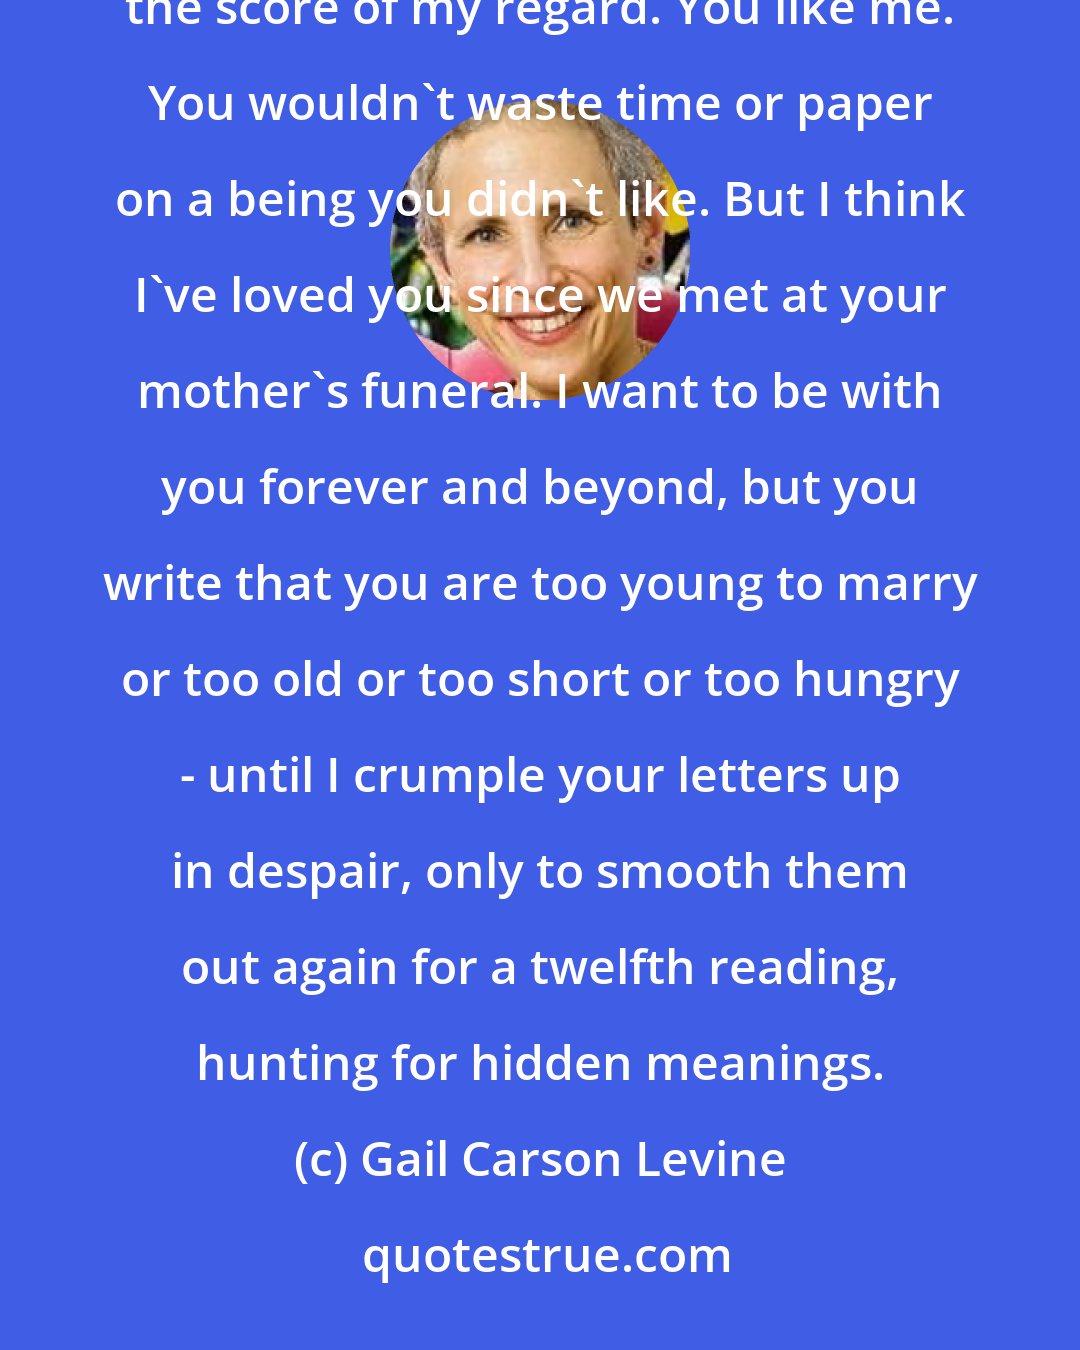 Gail Carson Levine: But what I really long to know you do not tell either: what you feel, although I've given you hints by the score of my regard. You like me. You wouldn't waste time or paper on a being you didn't like. But I think I've loved you since we met at your mother's funeral. I want to be with you forever and beyond, but you write that you are too young to marry or too old or too short or too hungry - until I crumple your letters up in despair, only to smooth them out again for a twelfth reading, hunting for hidden meanings.